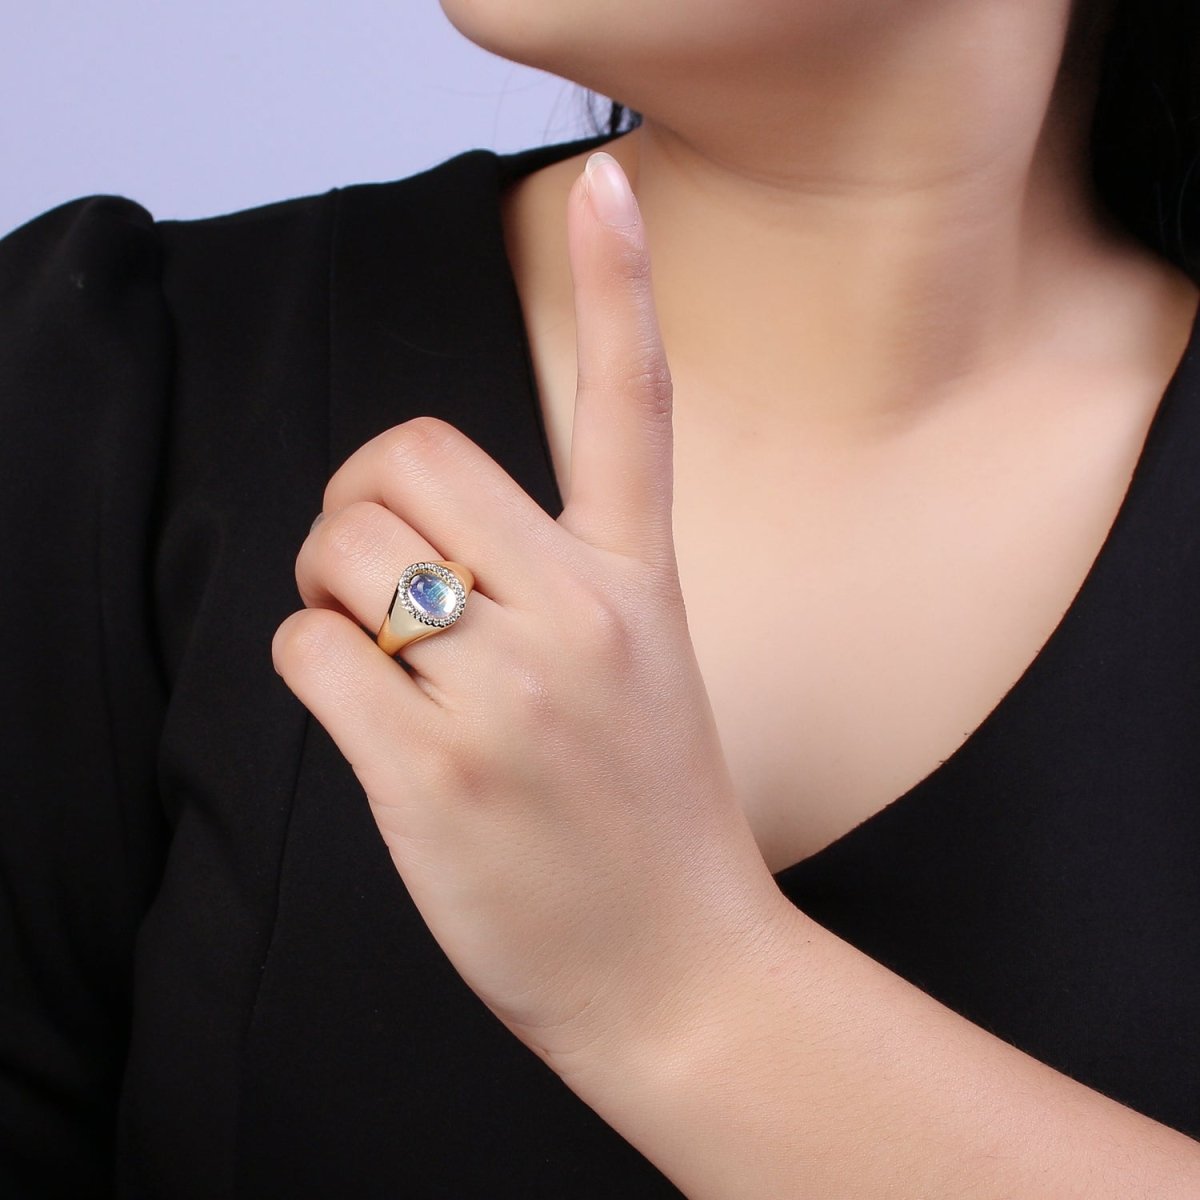 Dome Ring Cat's Eye Stone 14k Gold Filled Adjustable Minimalist Statement Ring Gift S-368 - DLUXCA